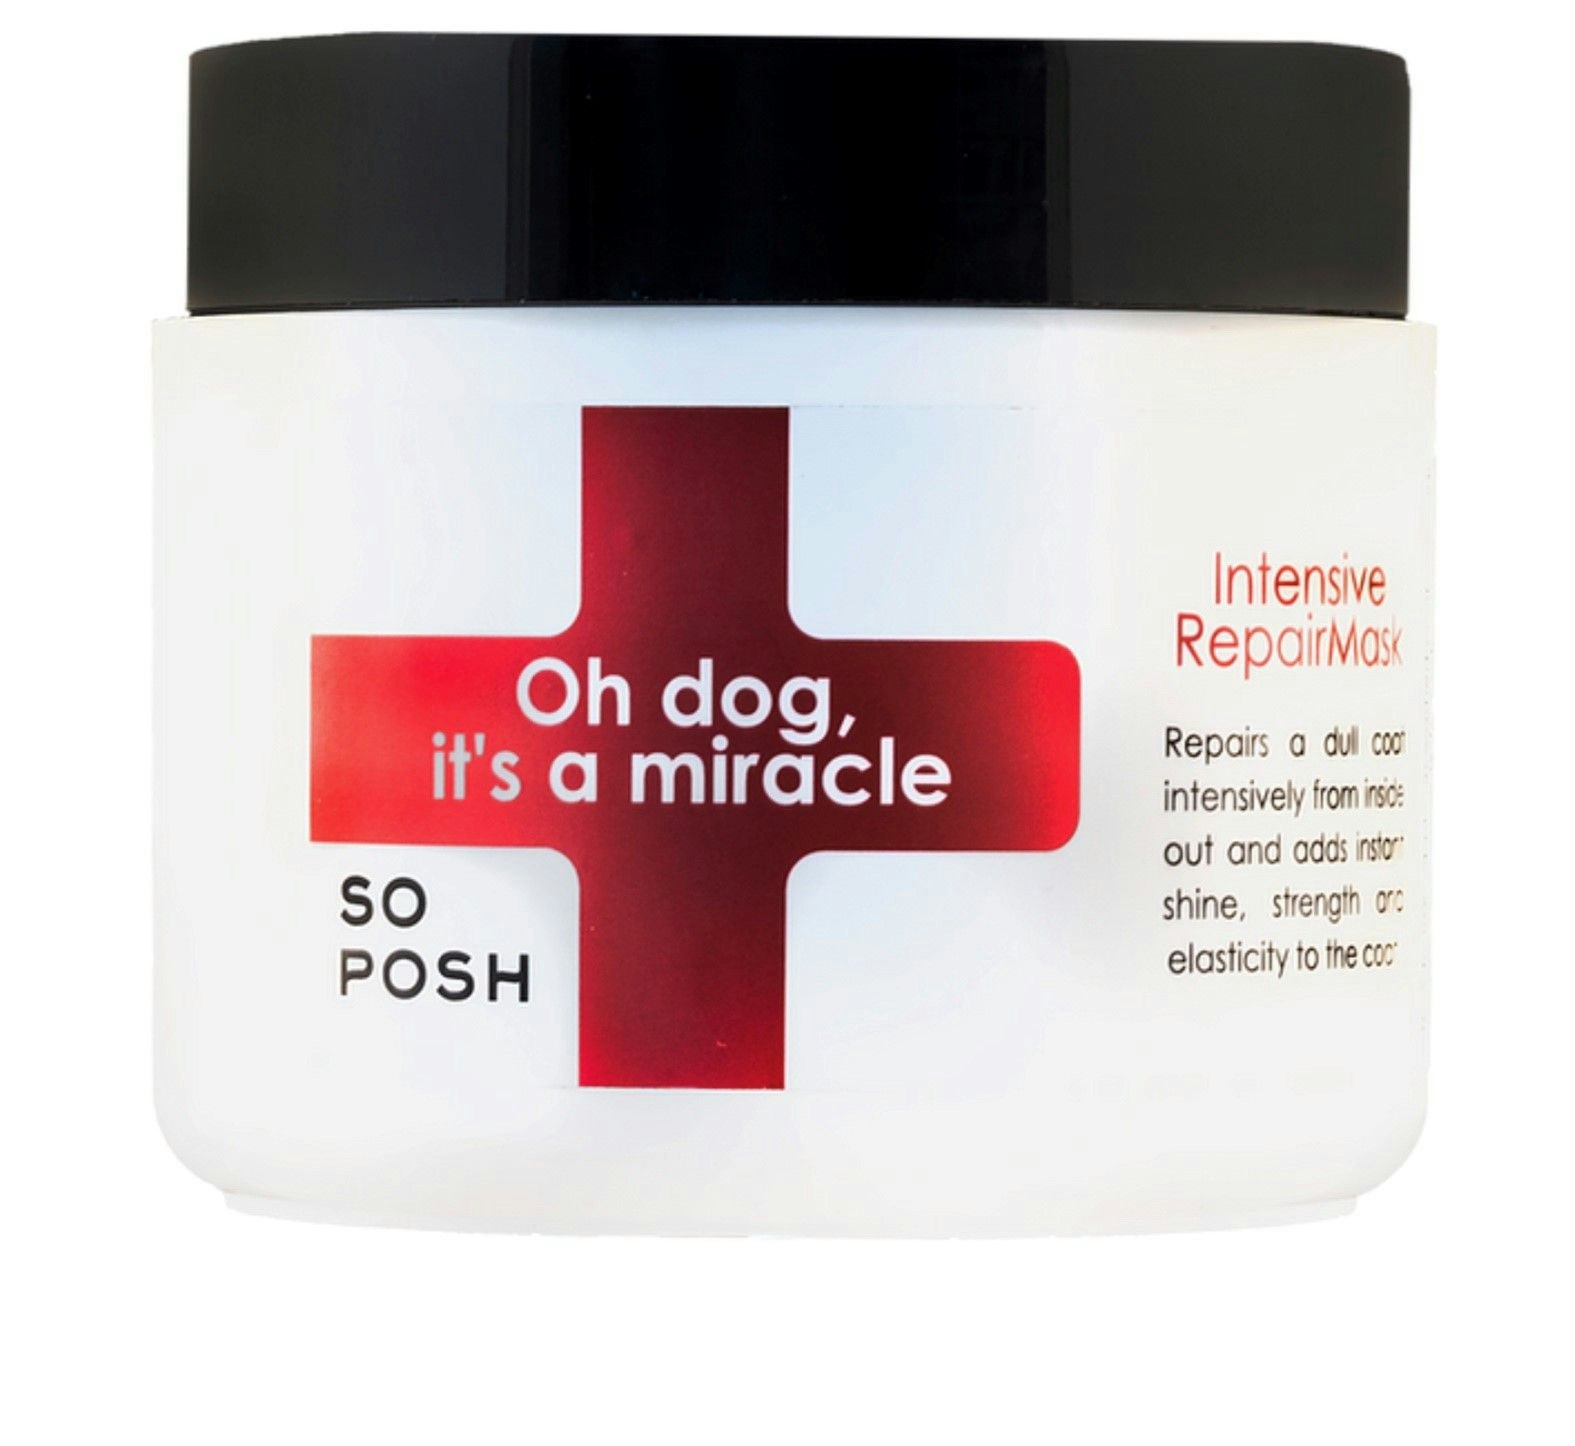 So Posh - Oh Dog, It’s a Miracle Mask